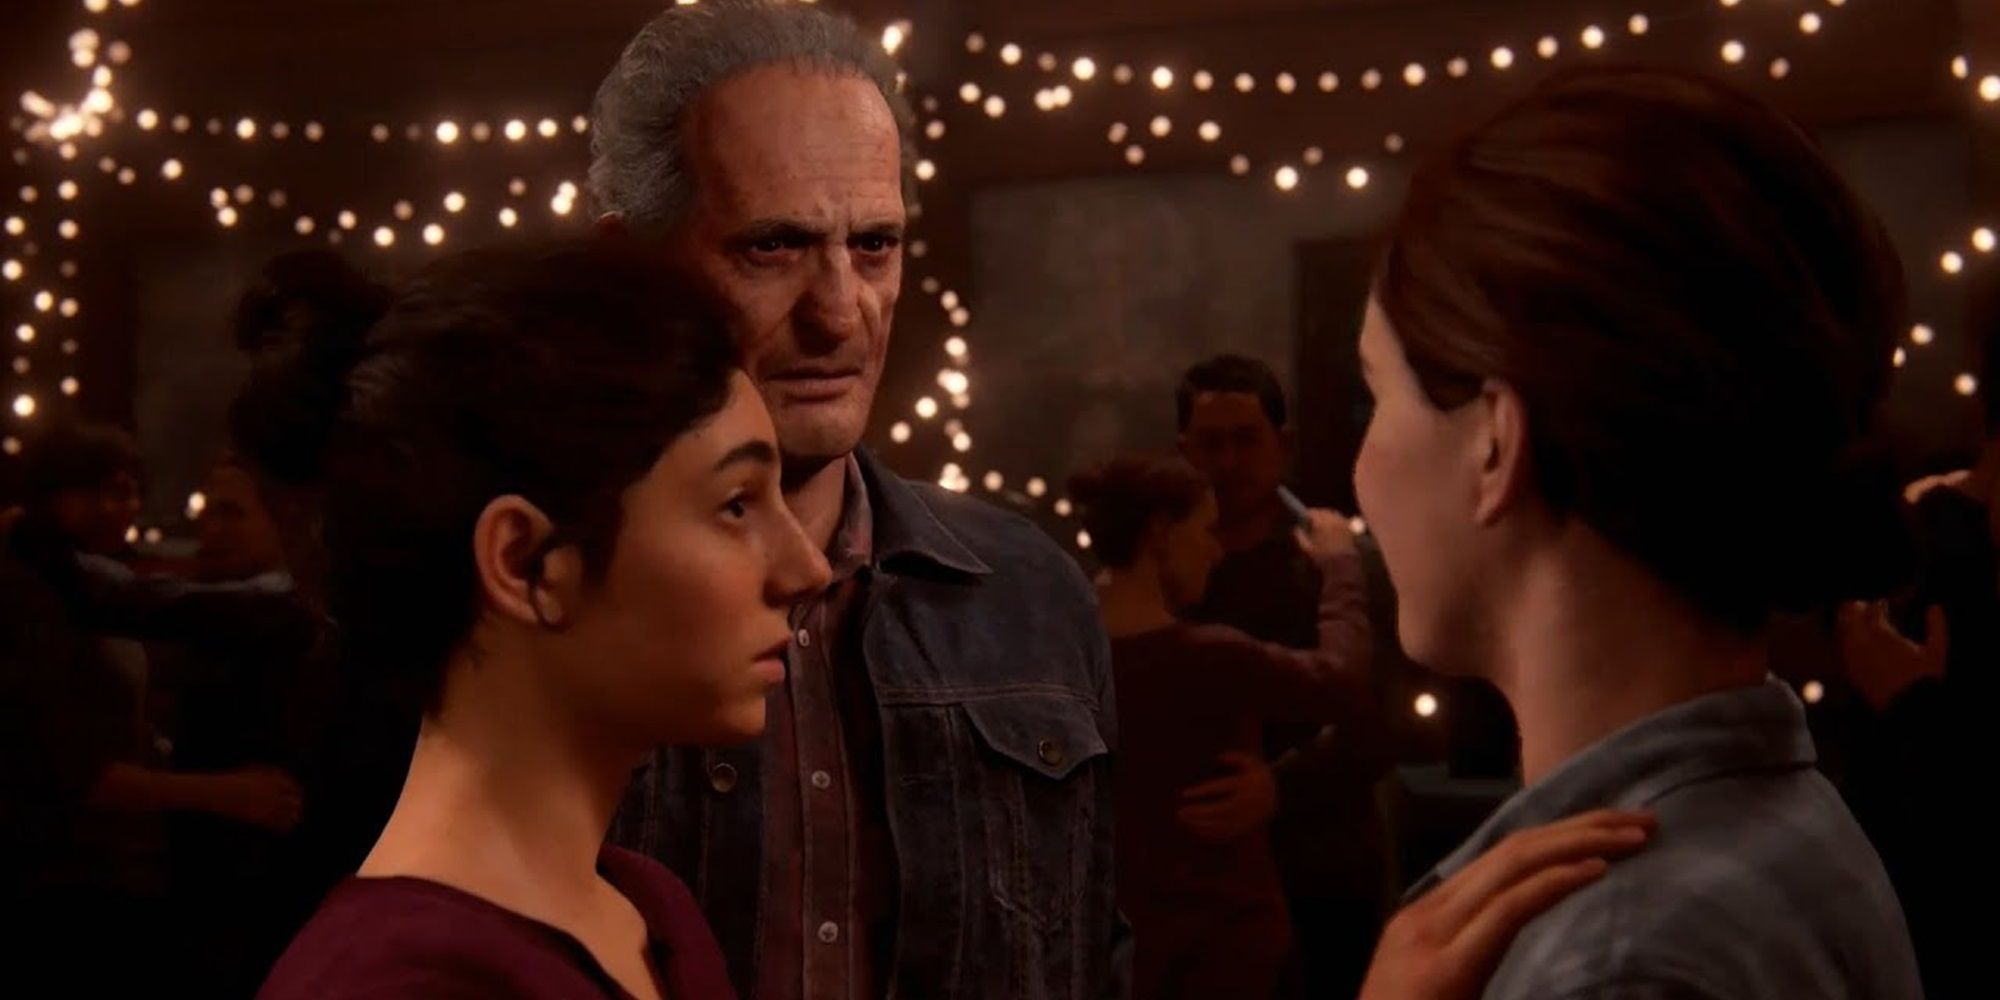 Seth confronts Ellie and Dina in The Last of Us Part II